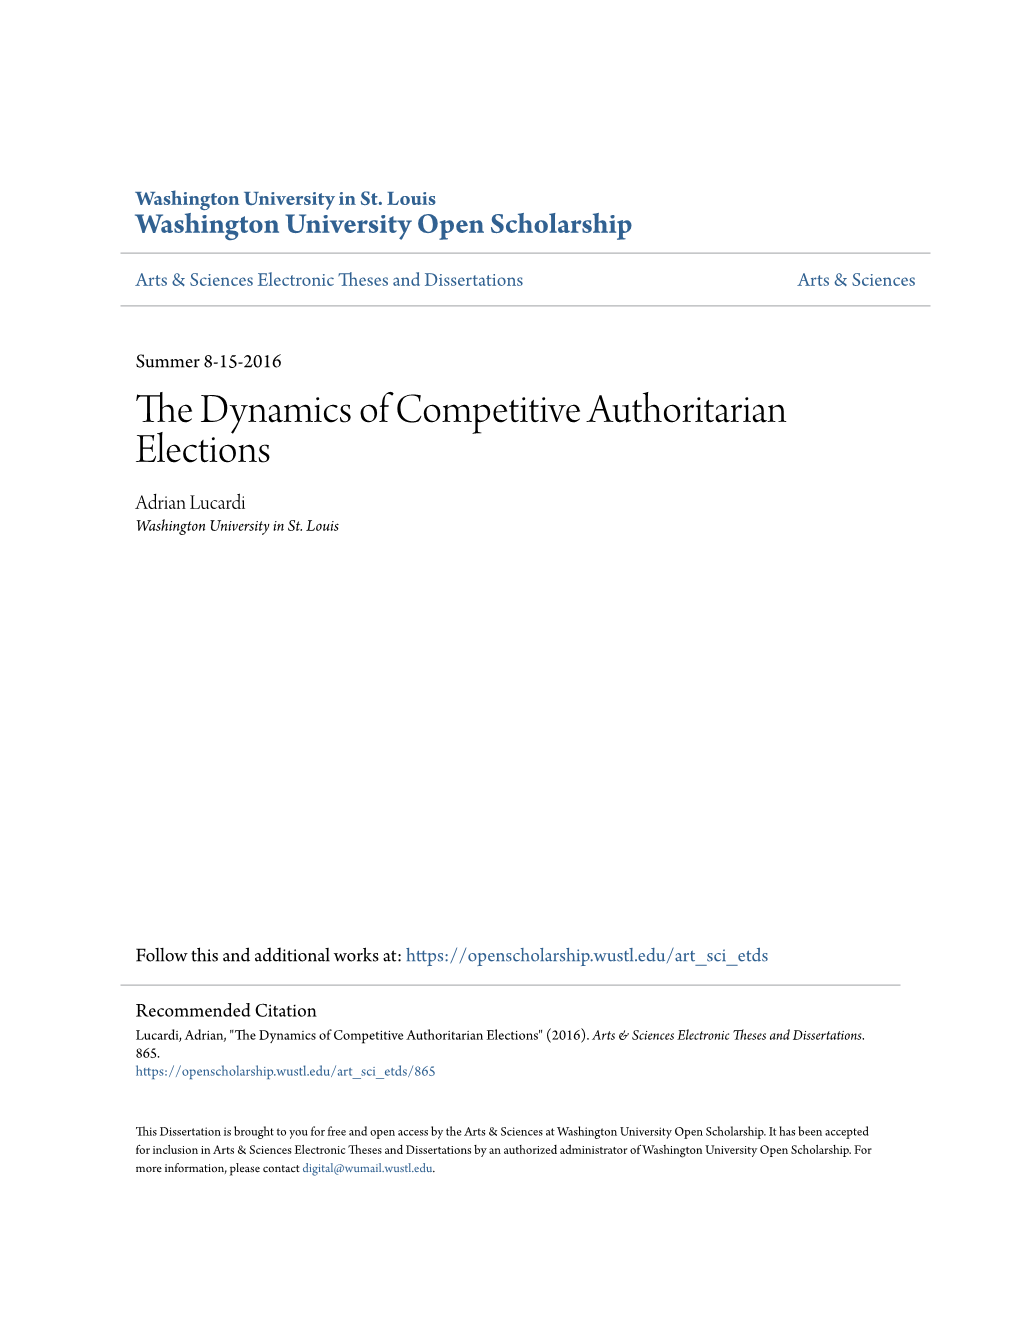 The Dynamics of Competitive Authoritarian Elections Adrian Lucardi Washington University in St